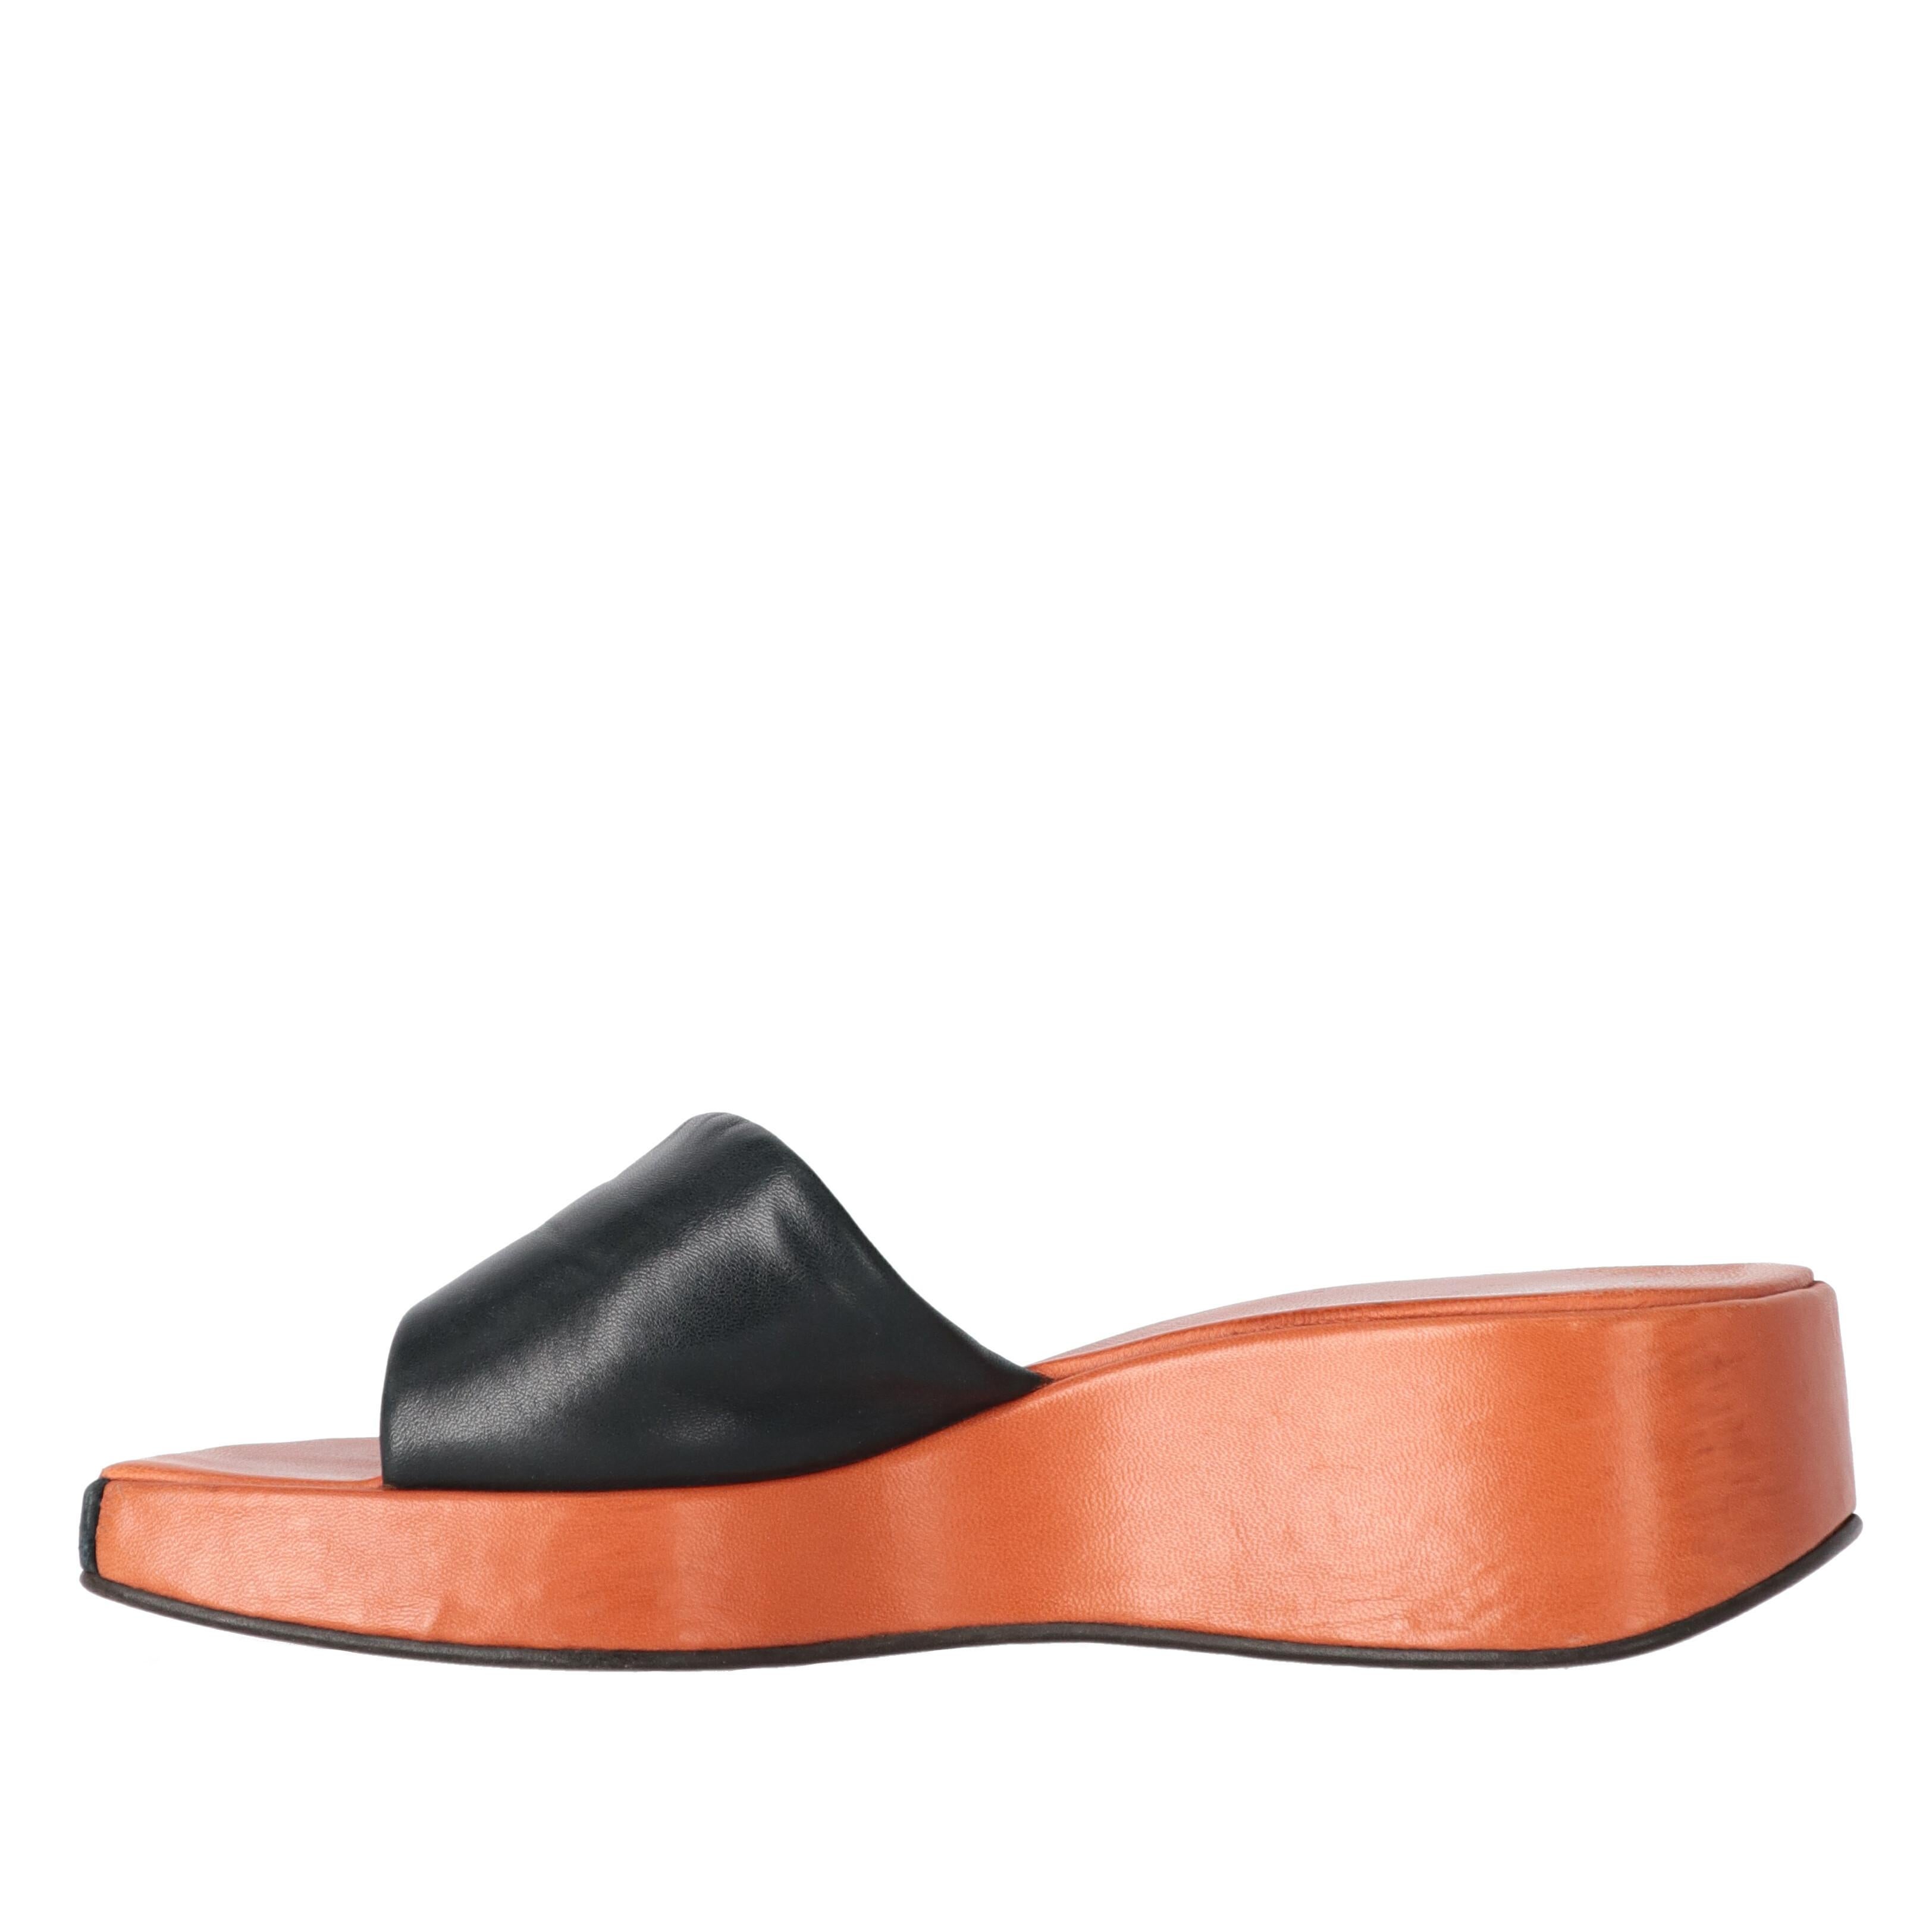 Sergio Rossi bicolor leather slippers, with black sides and band on the instep, orange insole and outer sides.

The item shows signs of wear on the leather and sole, as shown in the pictures.

Years: 2000s

Made in Italy

Size: 39 EU

Heel: 5